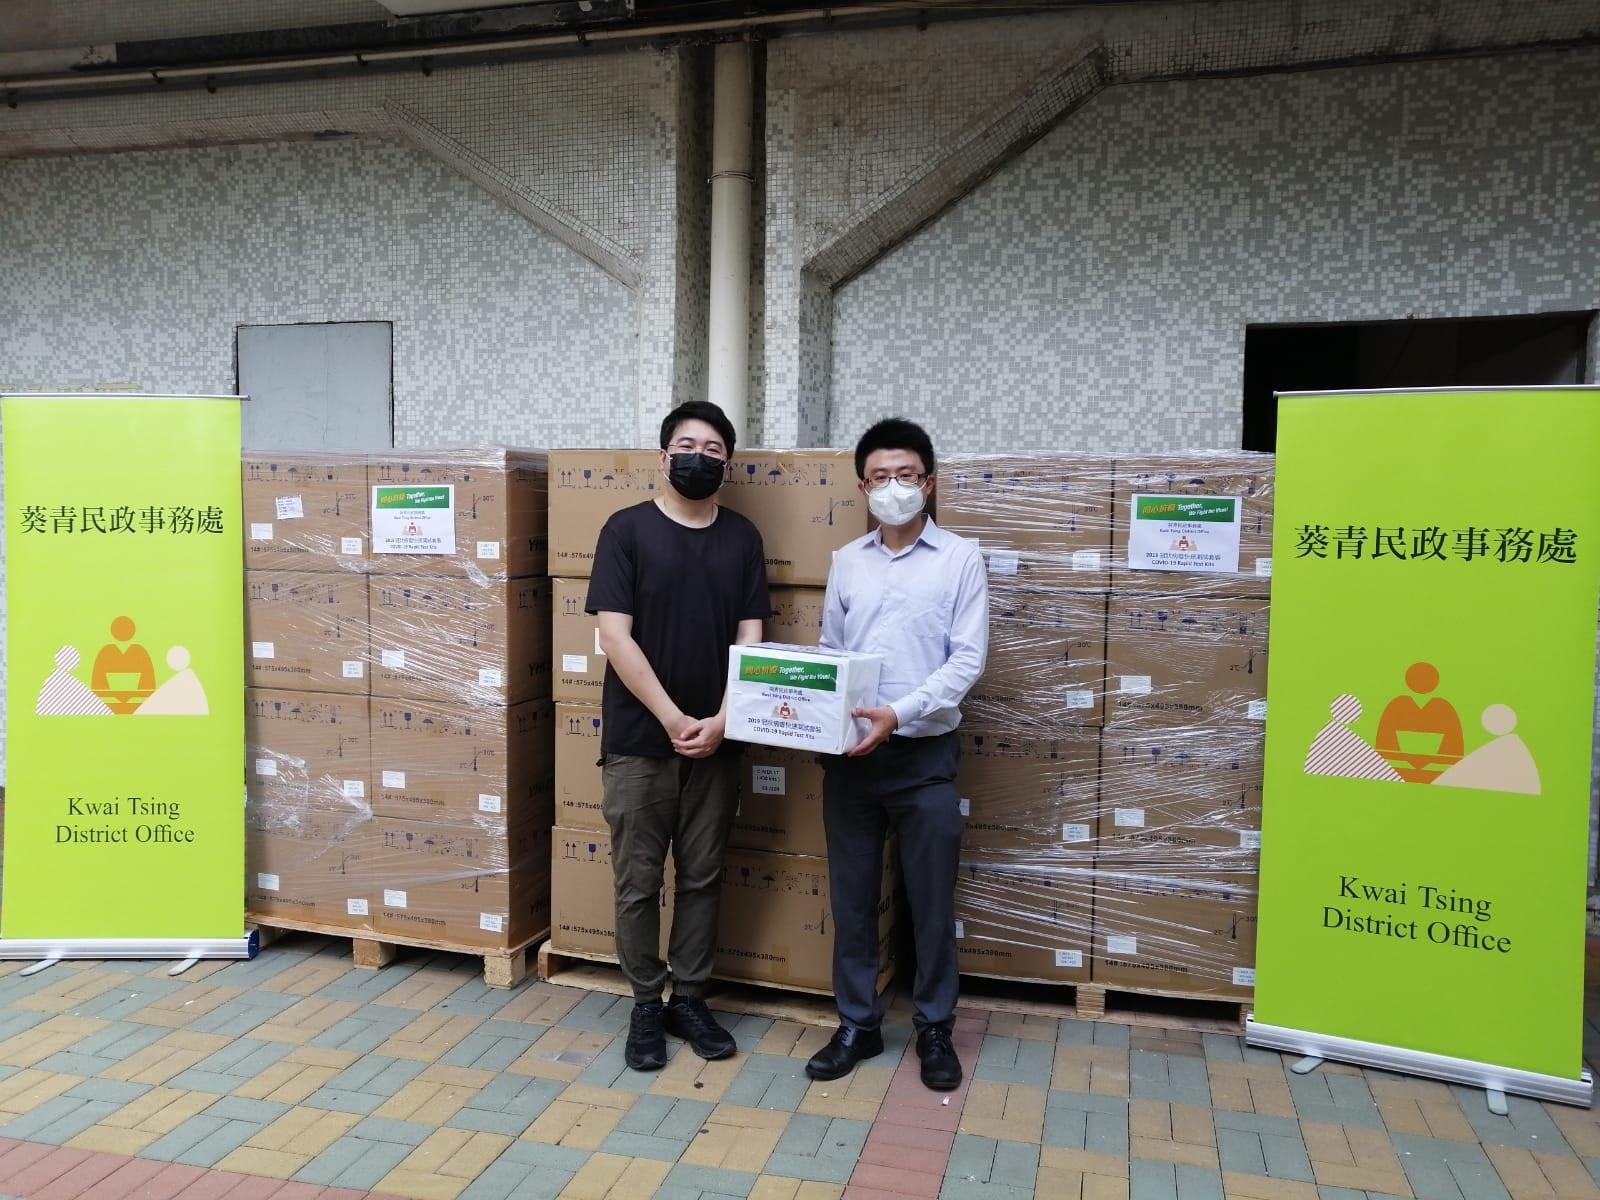 The Kwai Tsing District Office today (May 30) distributed COVID-19 rapid test kits to households, cleansing workers and property management staff living and working in Cheung On Estate for voluntary testing through the property management company and the owners' corporation.